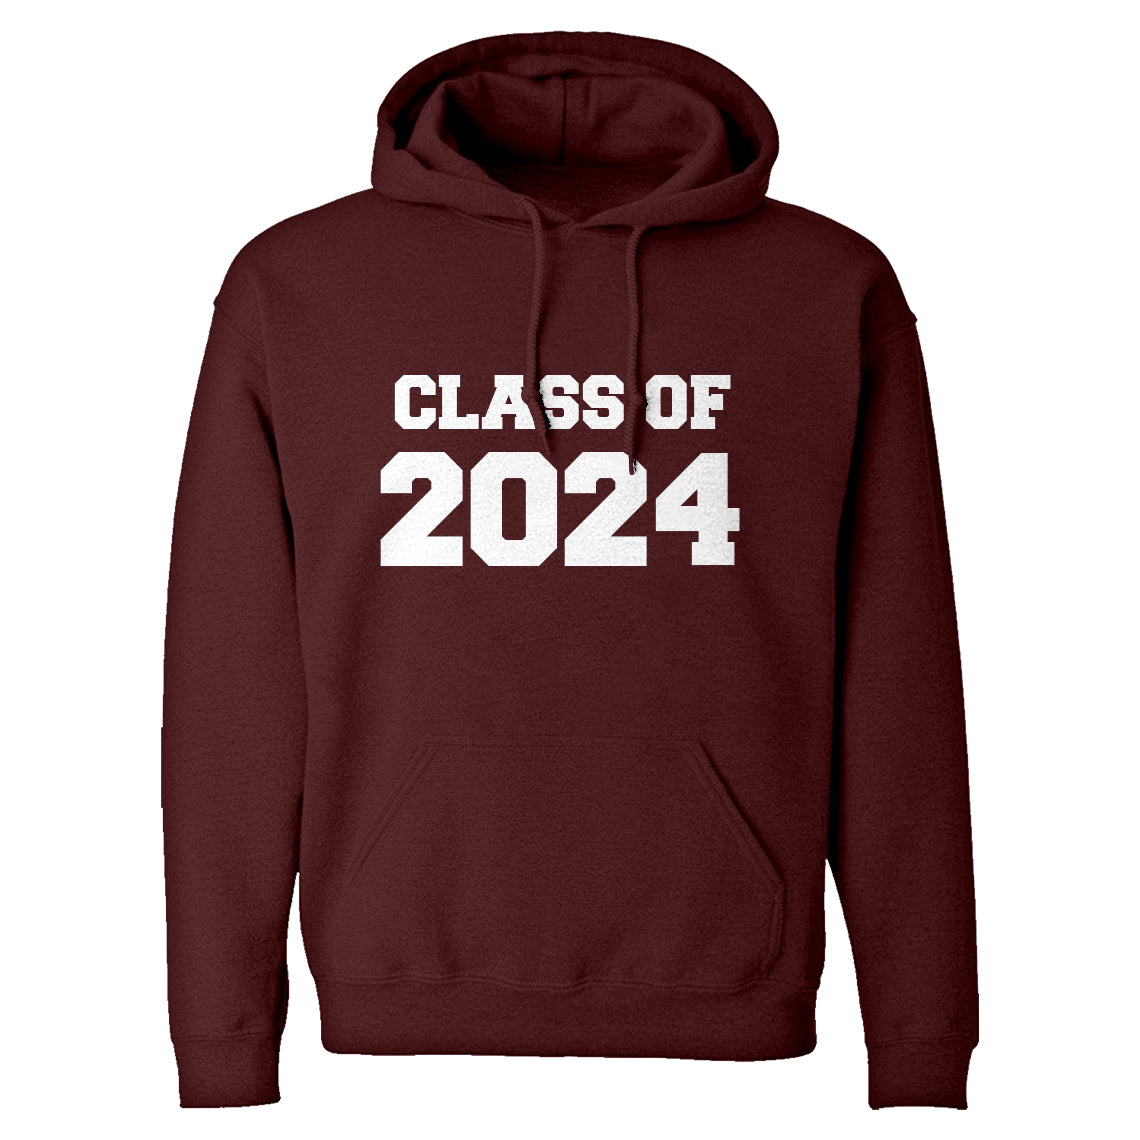 Class of 2024 Unisex Adult Hoodie – Indica Plateau